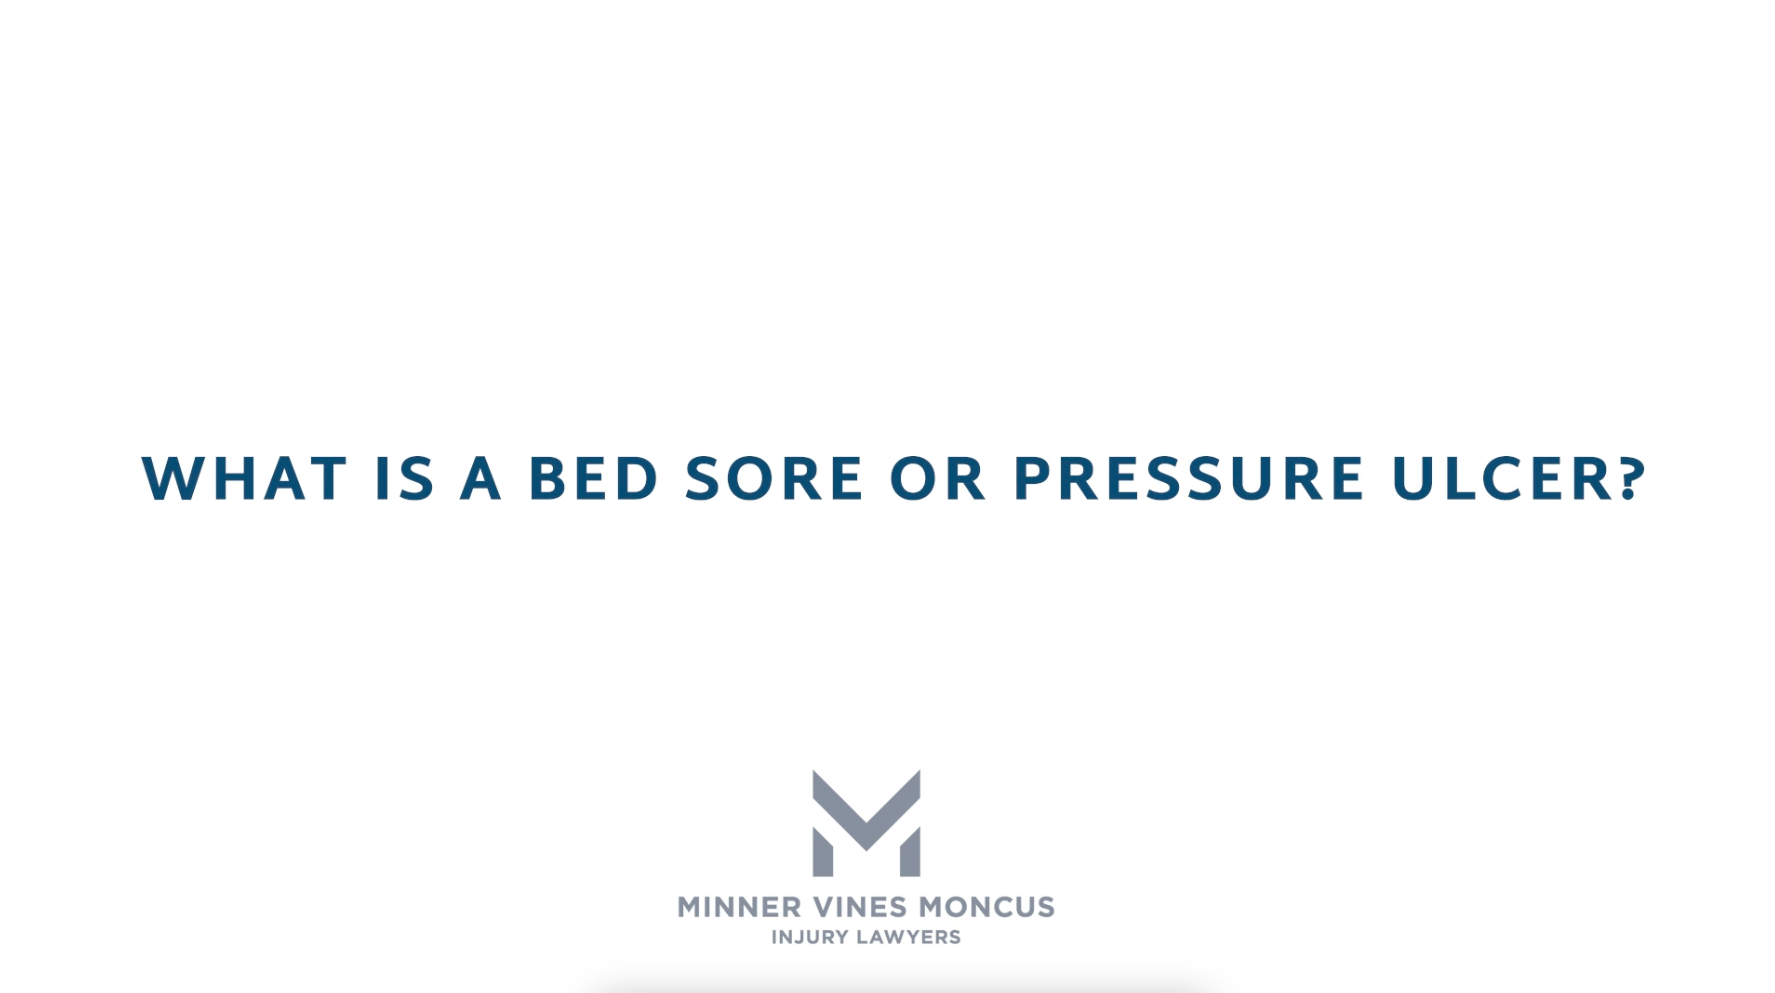 What is a bed sore or pressure ulcer?